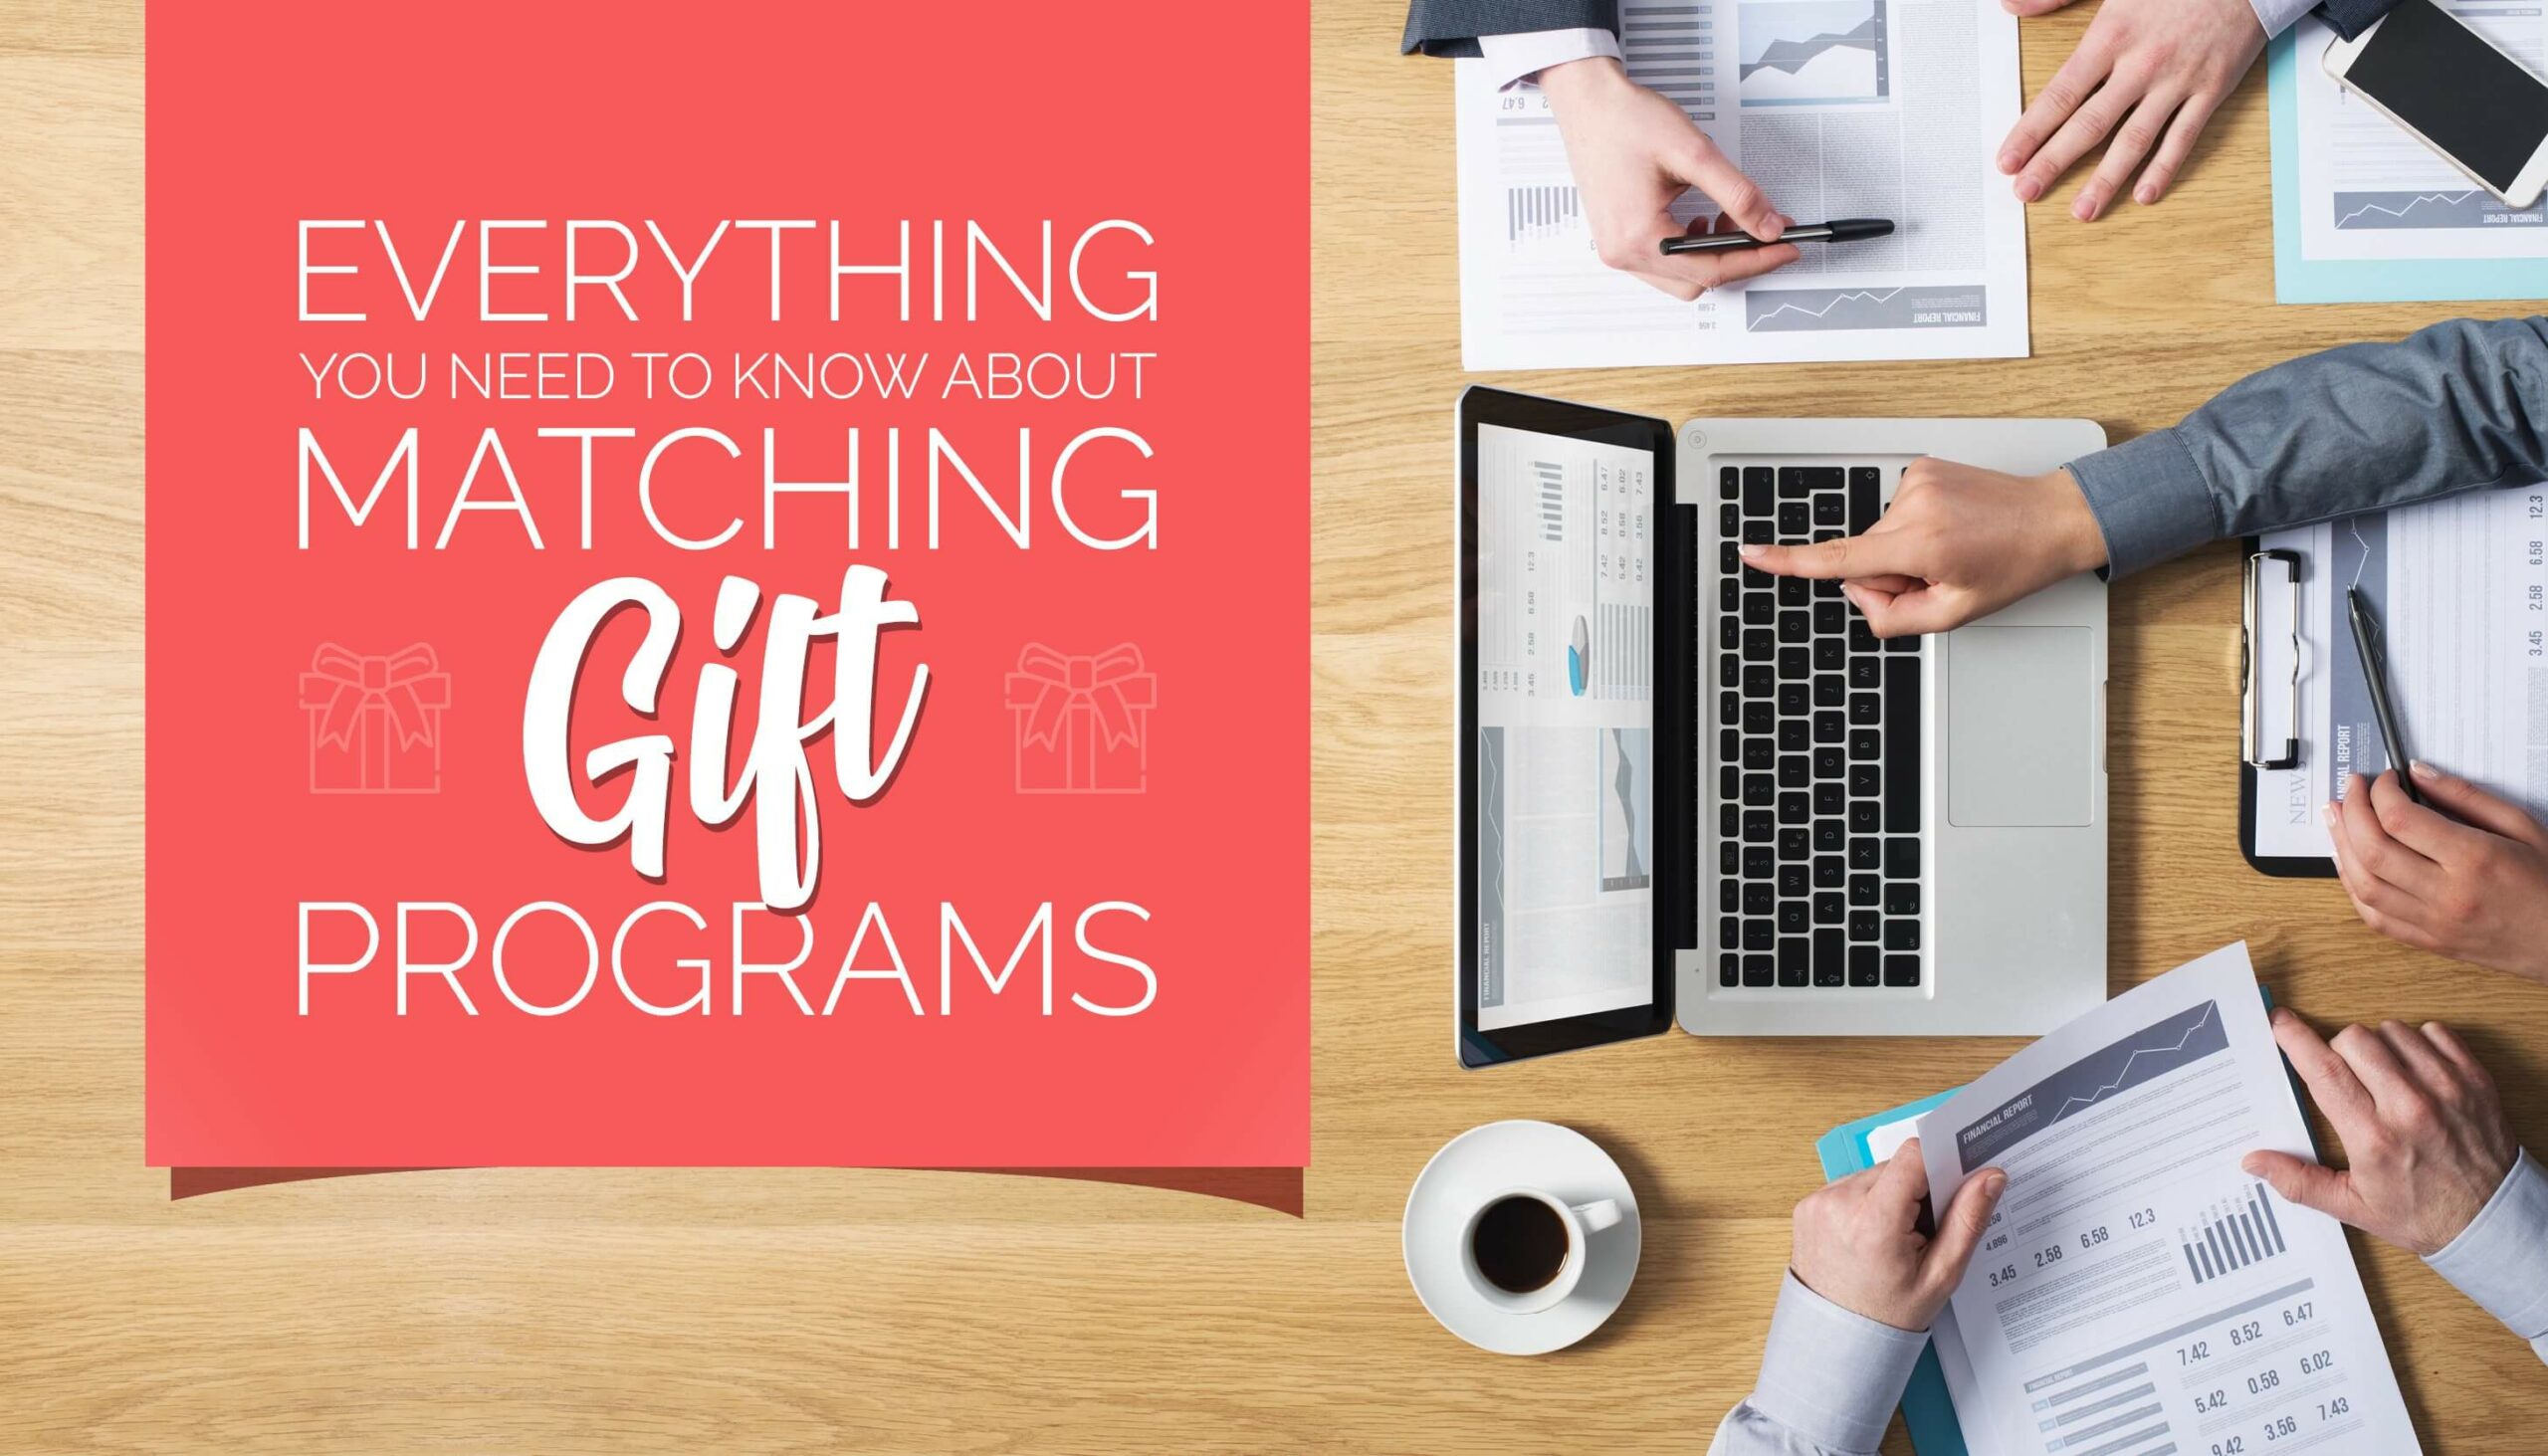 Everything You Need to Know About Matching Gift Programs